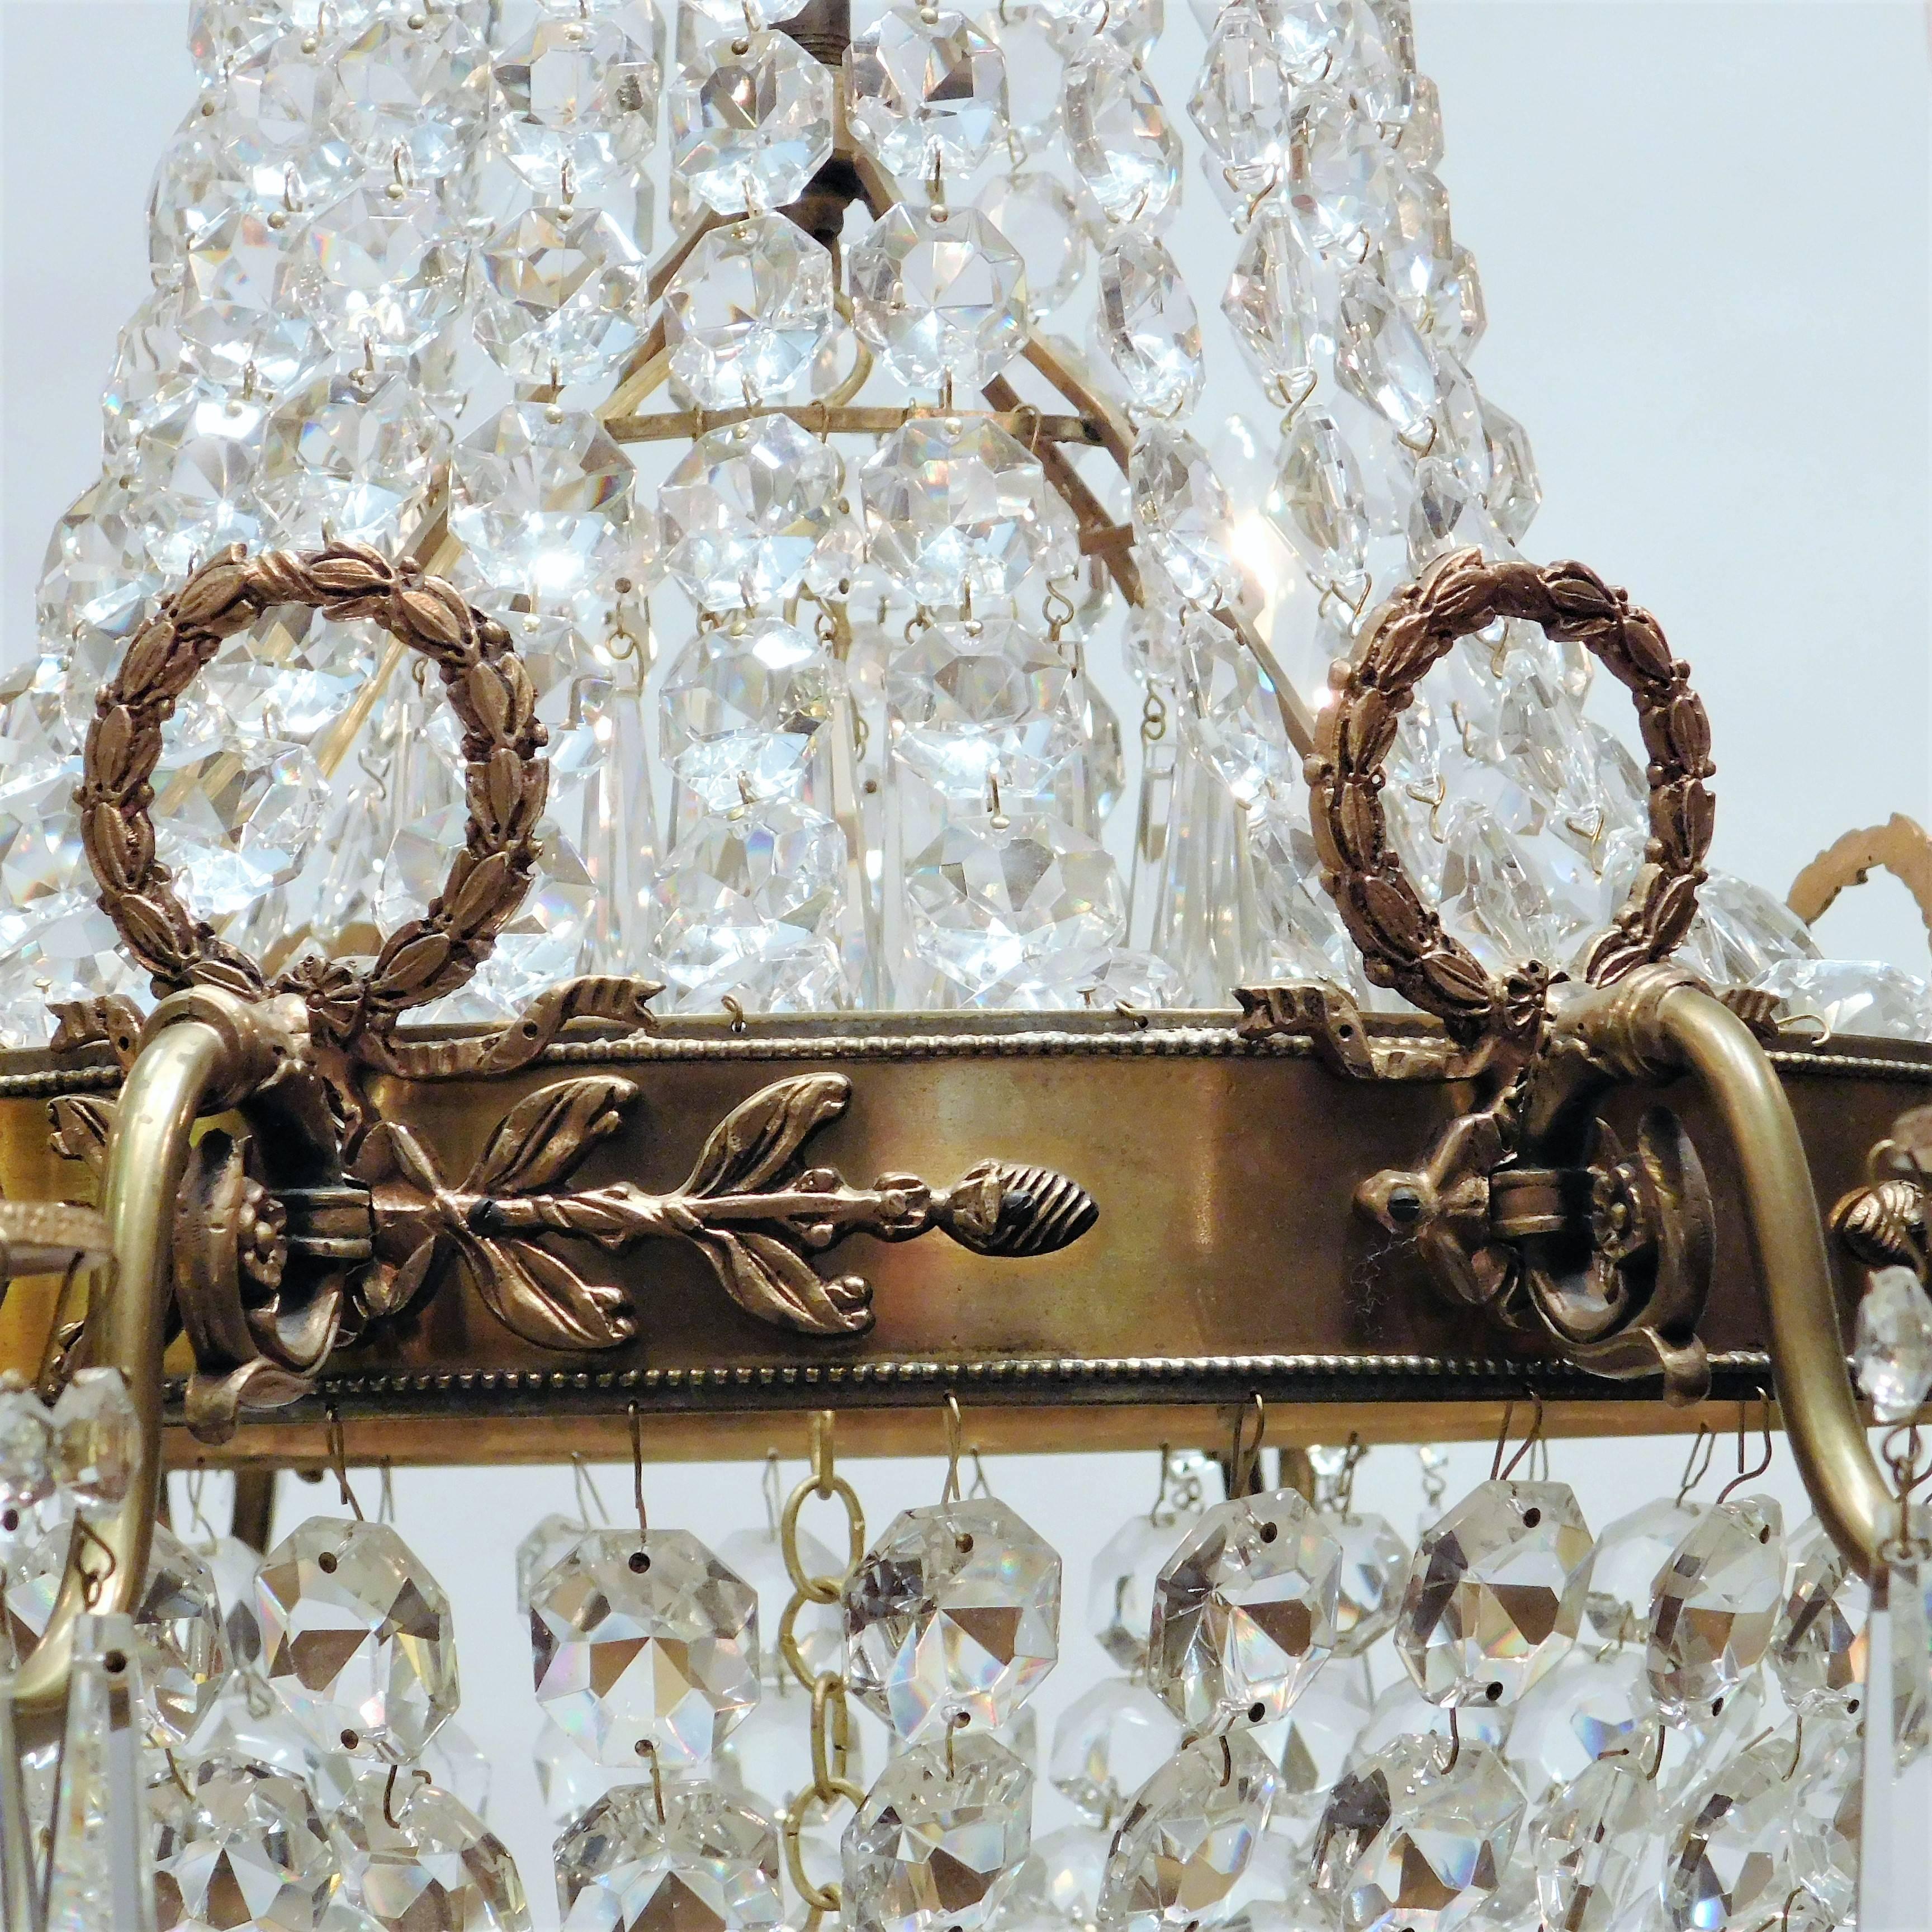 20th Century Continental Empire Style Gilt Brass and Crystal Eight-Light Chandelier